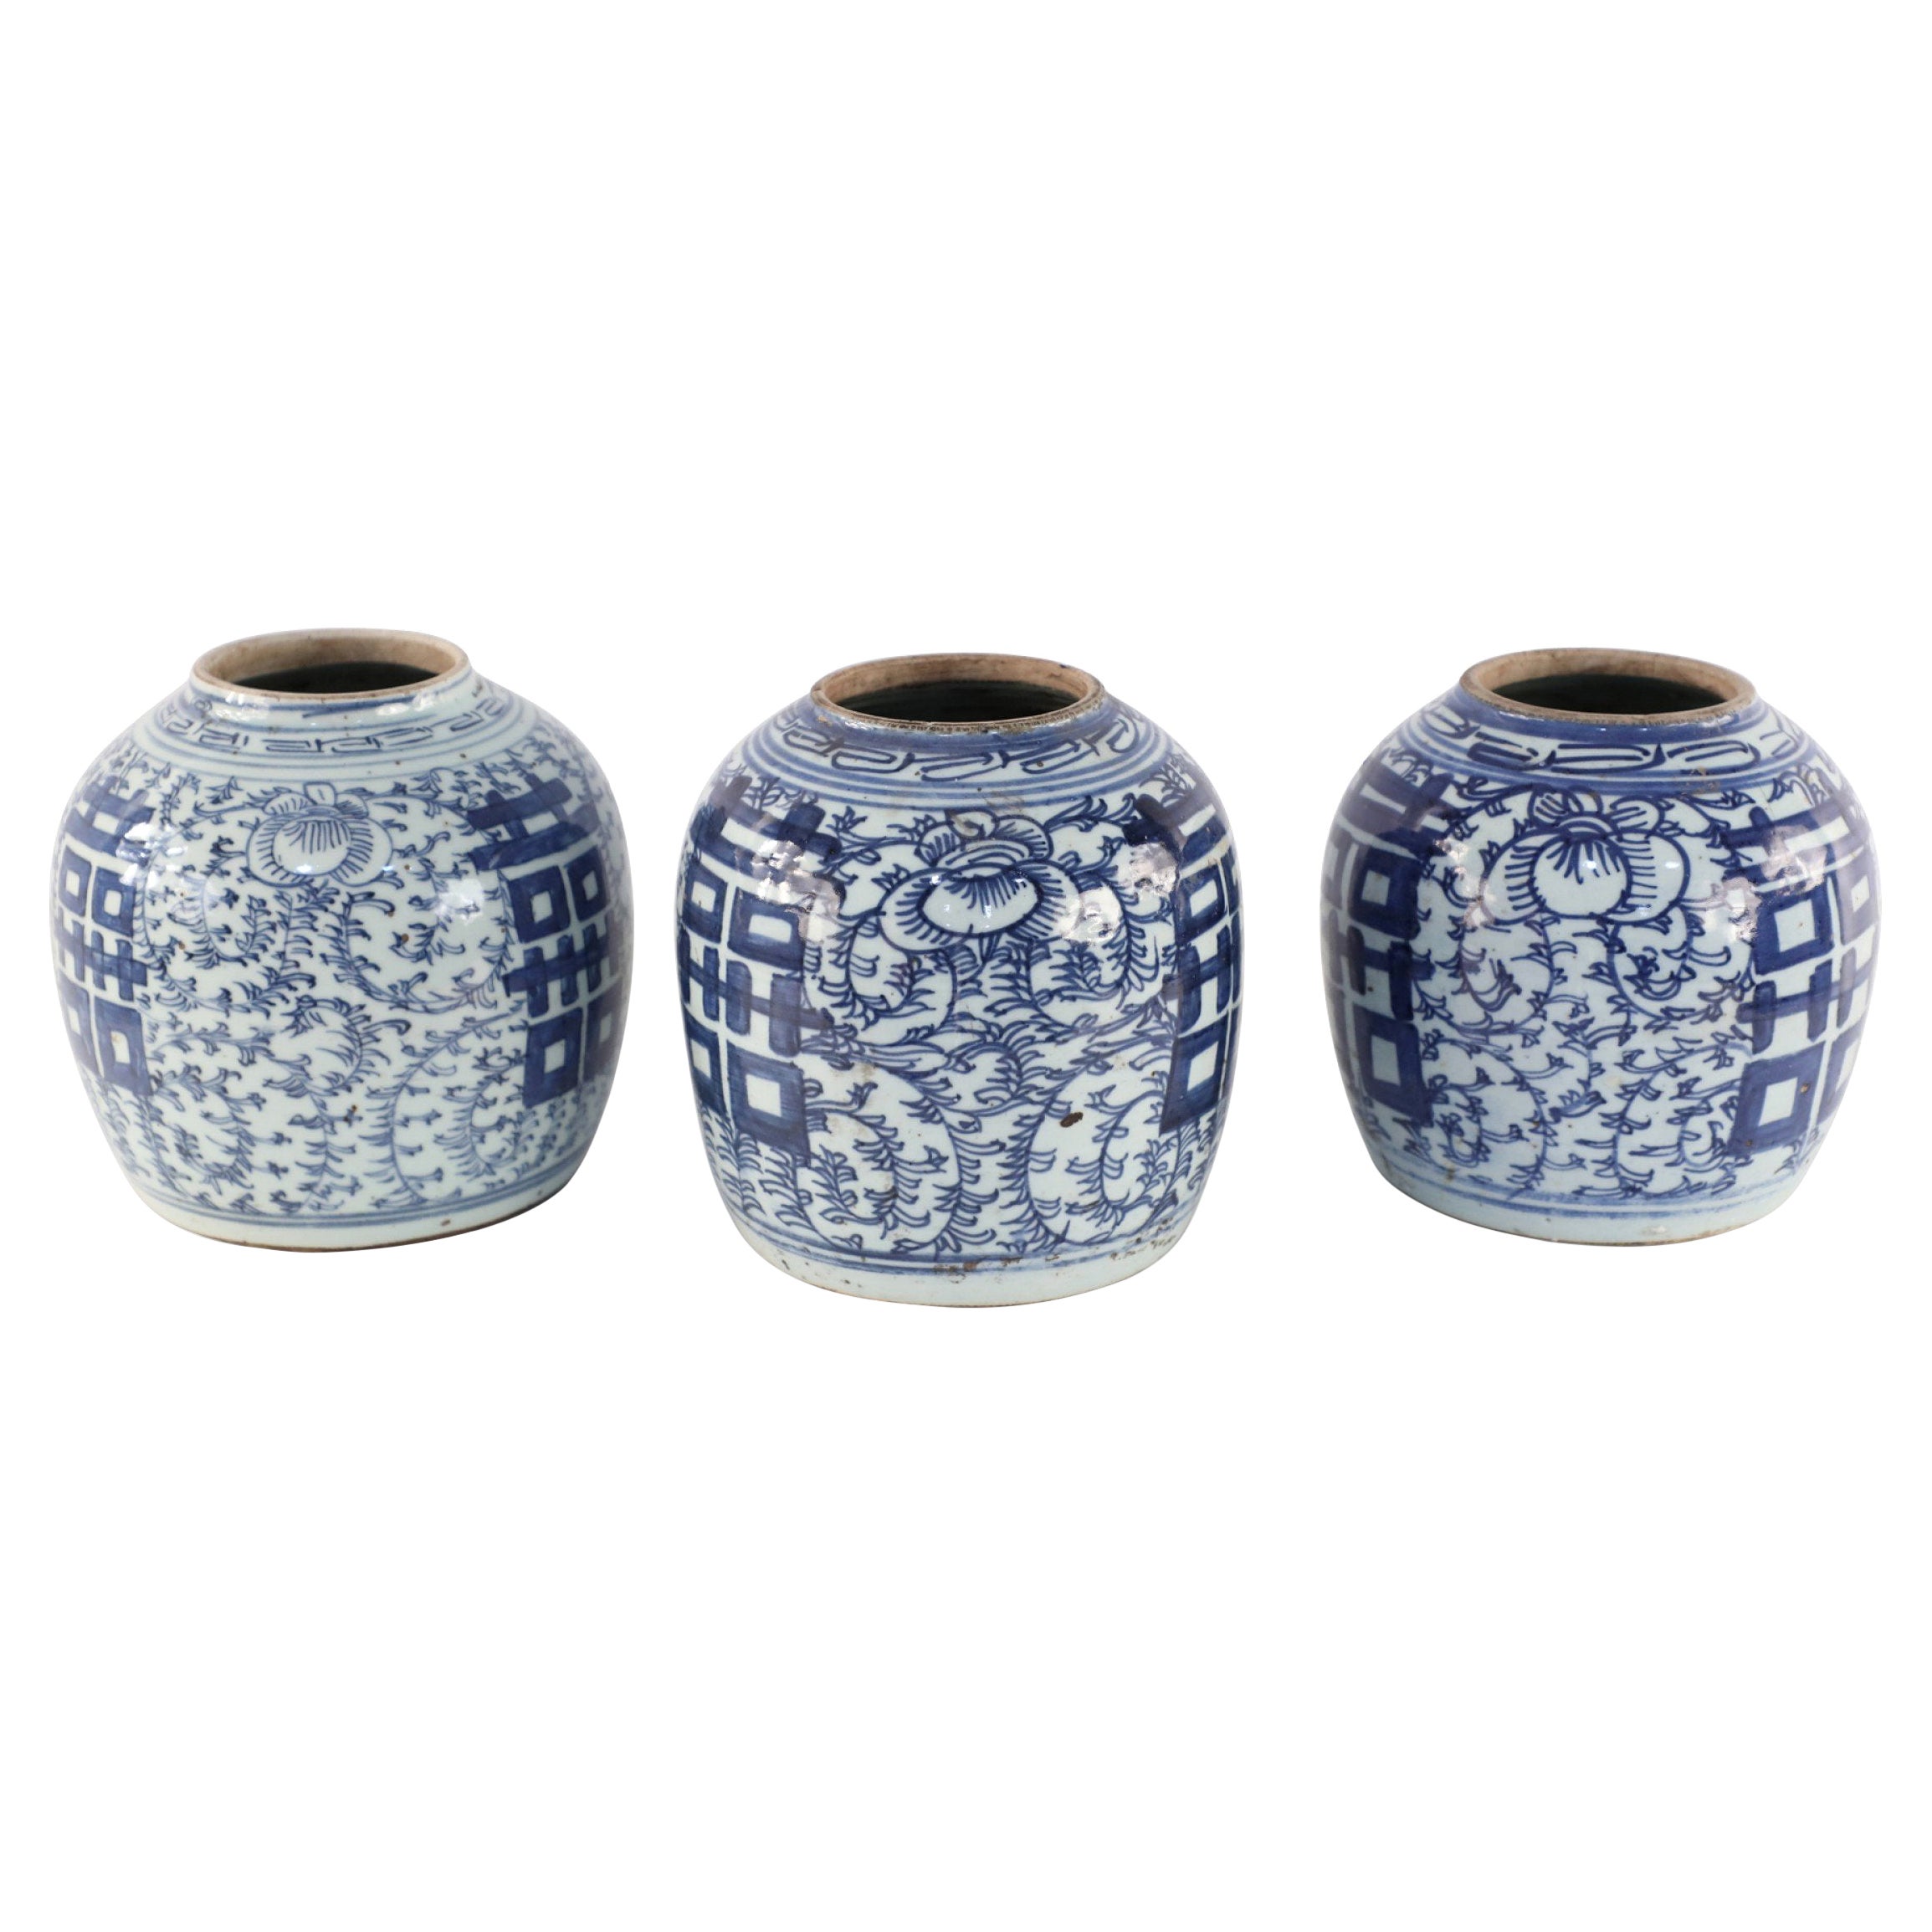 Chinese White and Blue Character and Floral Ginger Jar Vases